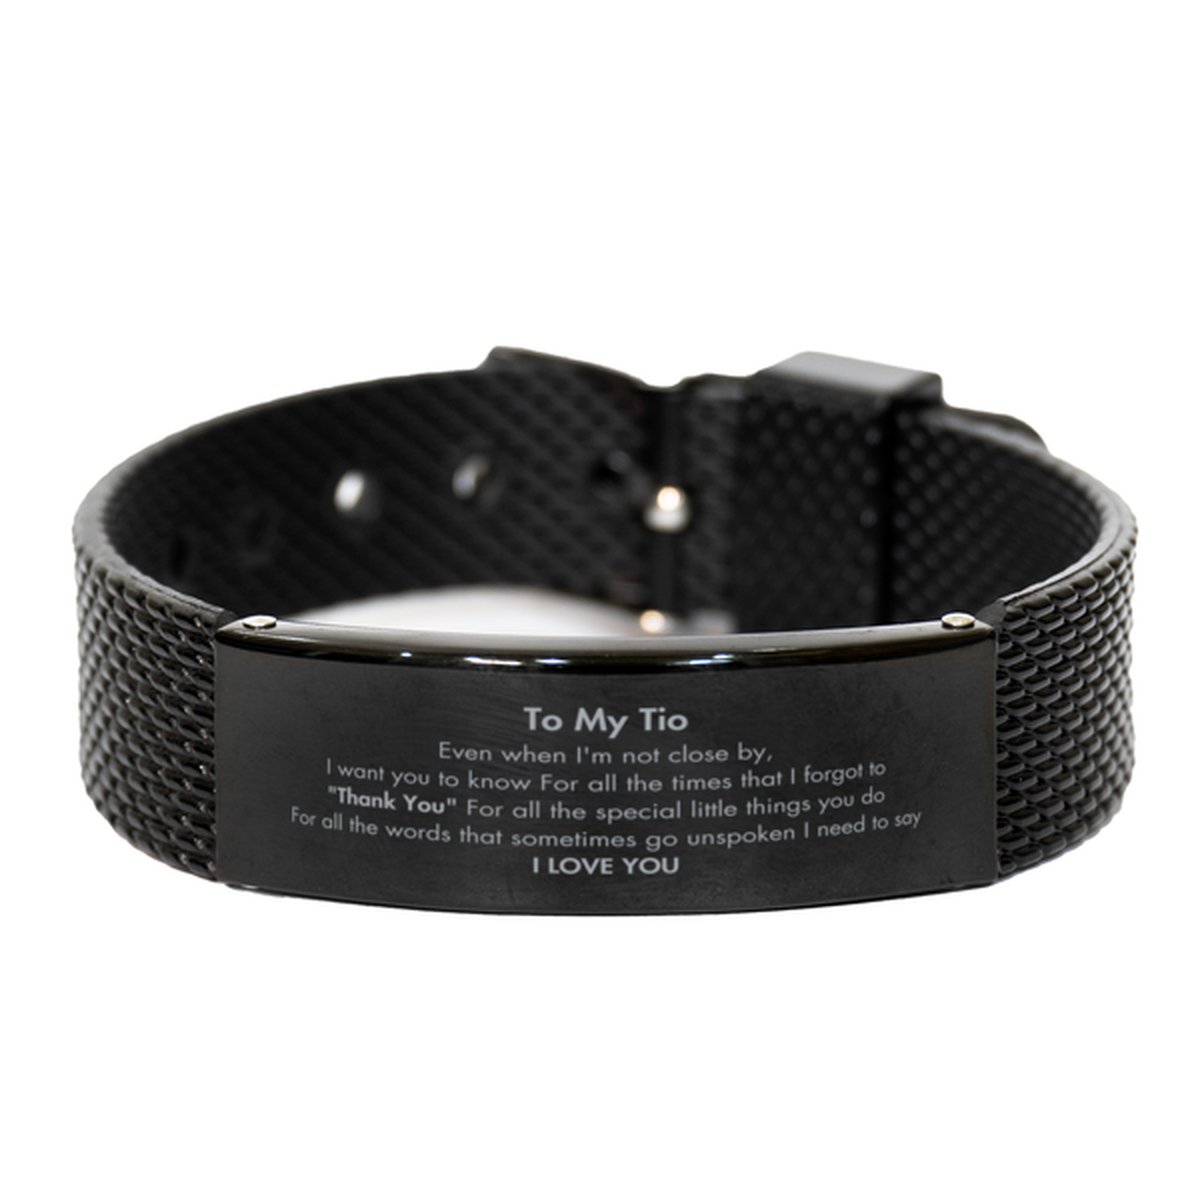 Thank You Gifts for Tio, Keepsake Black Shark Mesh Bracelet Gifts for Tio Birthday Mother's day Father's Day Tio For all the words That sometimes go unspoken I need to say I LOVE YOU